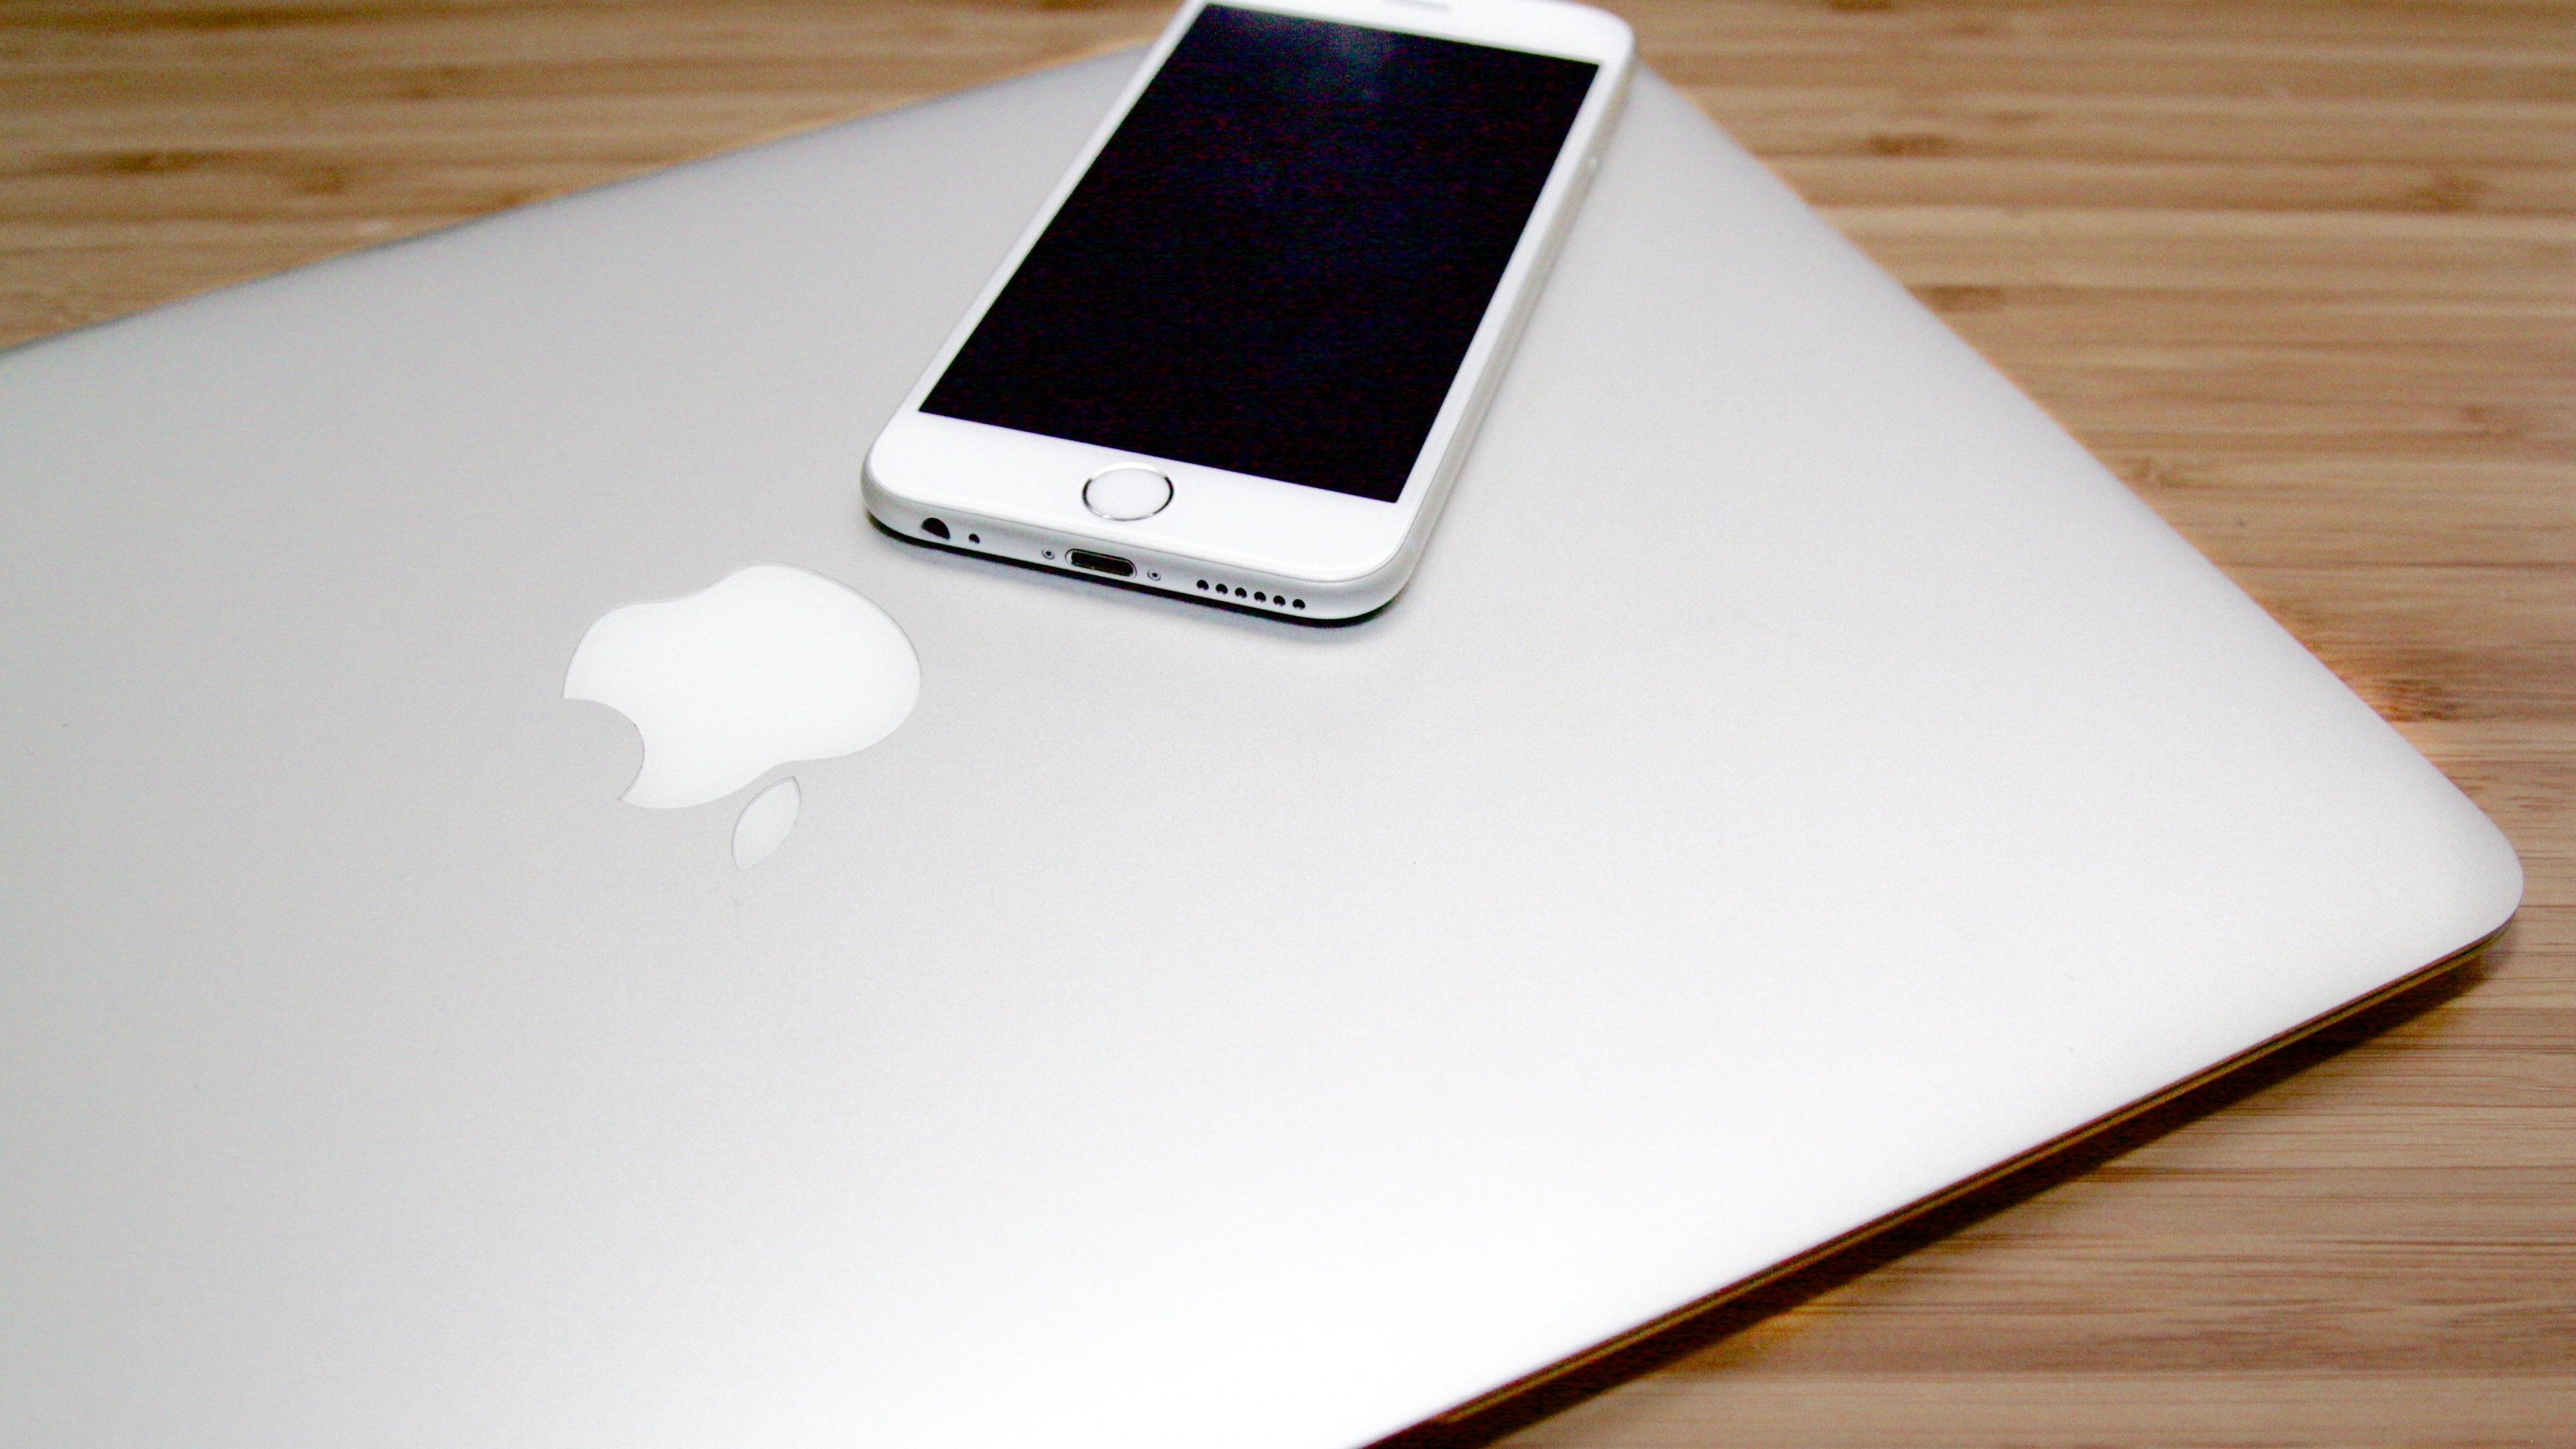 Silver Iphone 6 on Macbook. Wallpaper in 3840x2160 Resolution